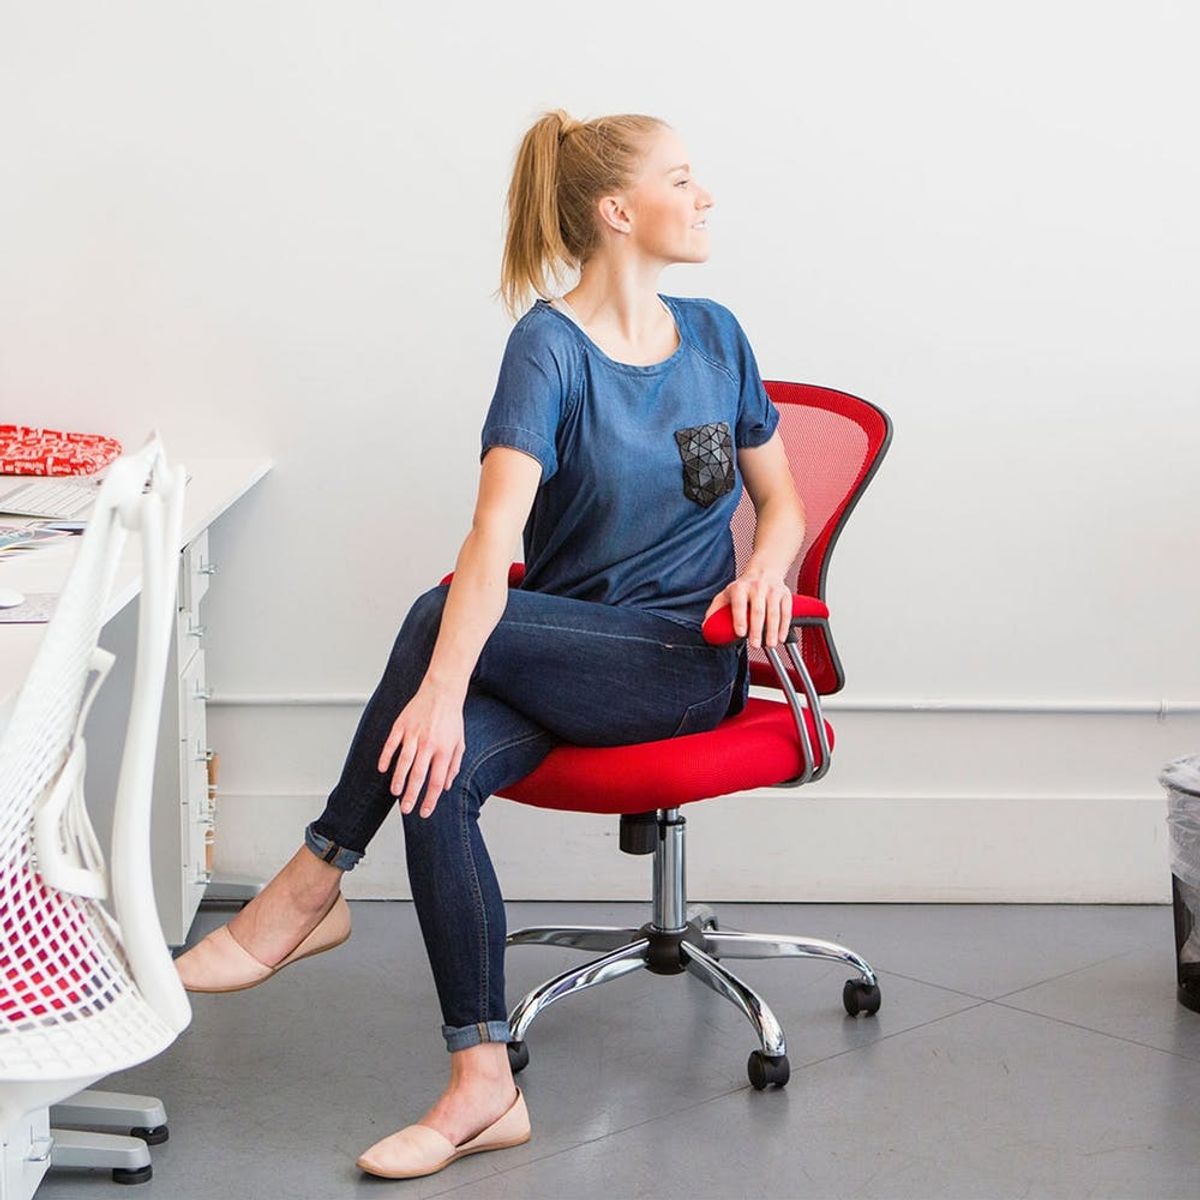 4 Office Workout Moves to Kick That Mid-Afternoon Slump